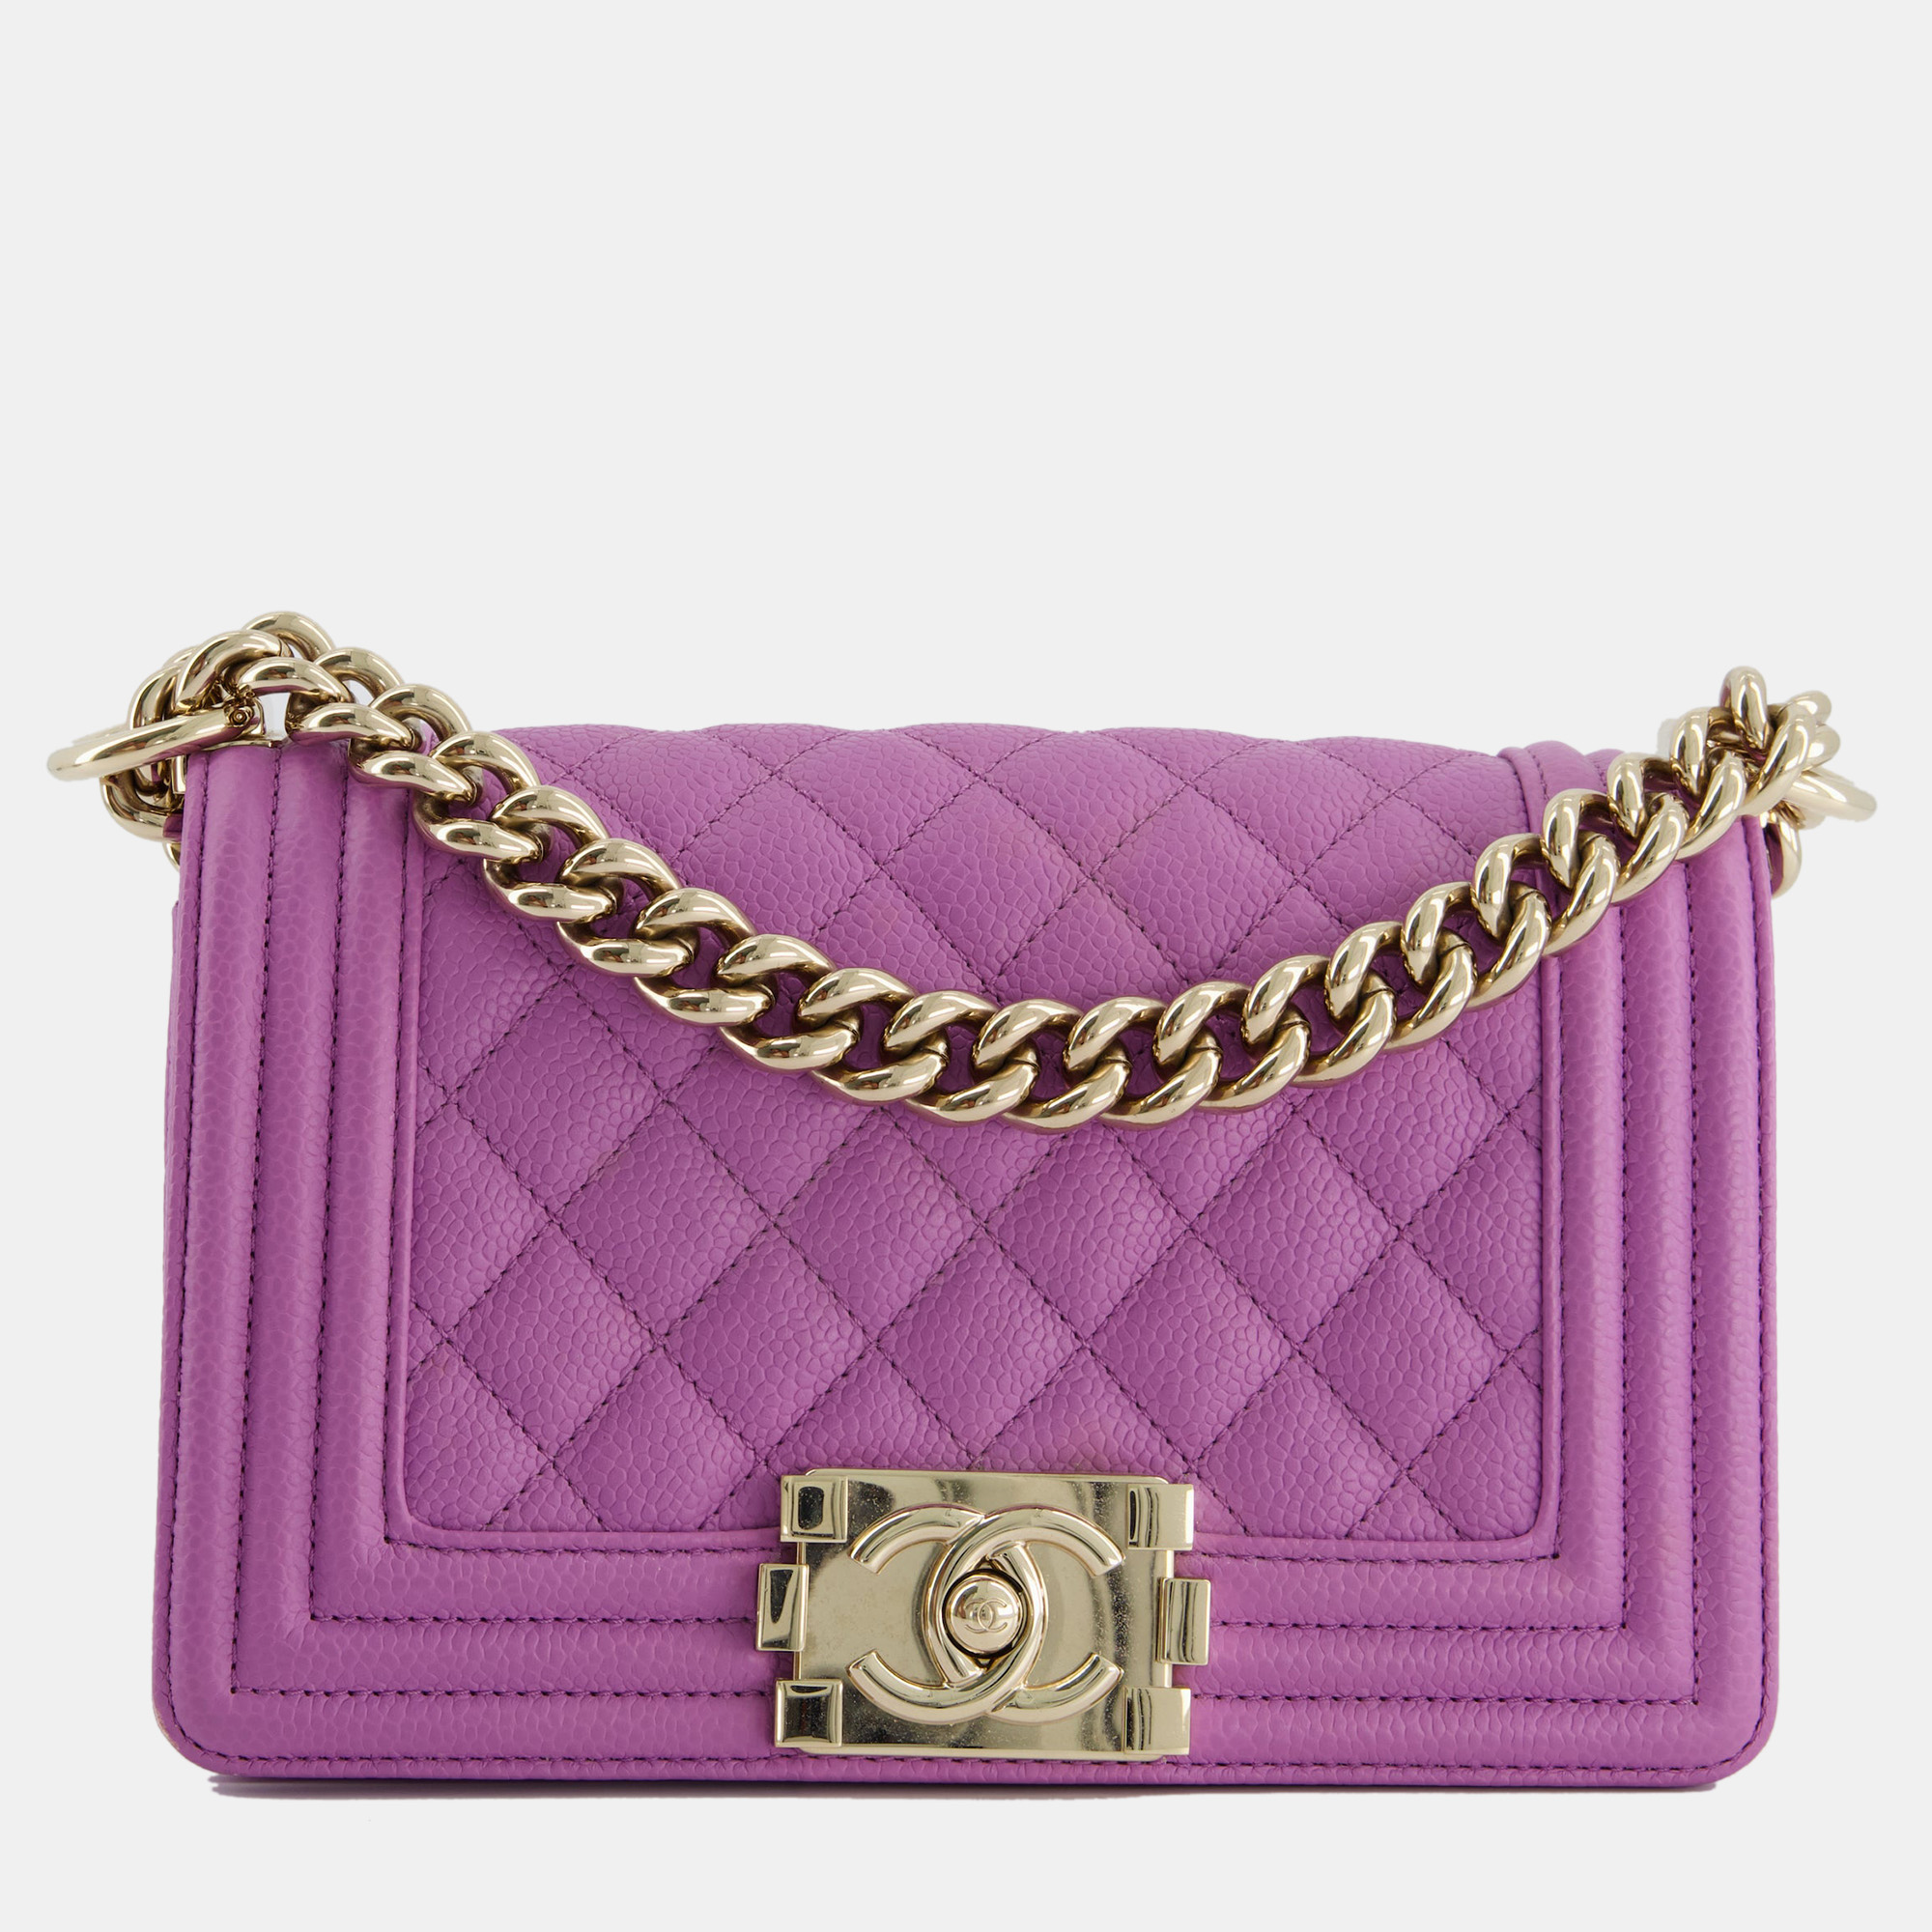 Chanel purple small boy bag in lambskin leather with champagne gold hardware